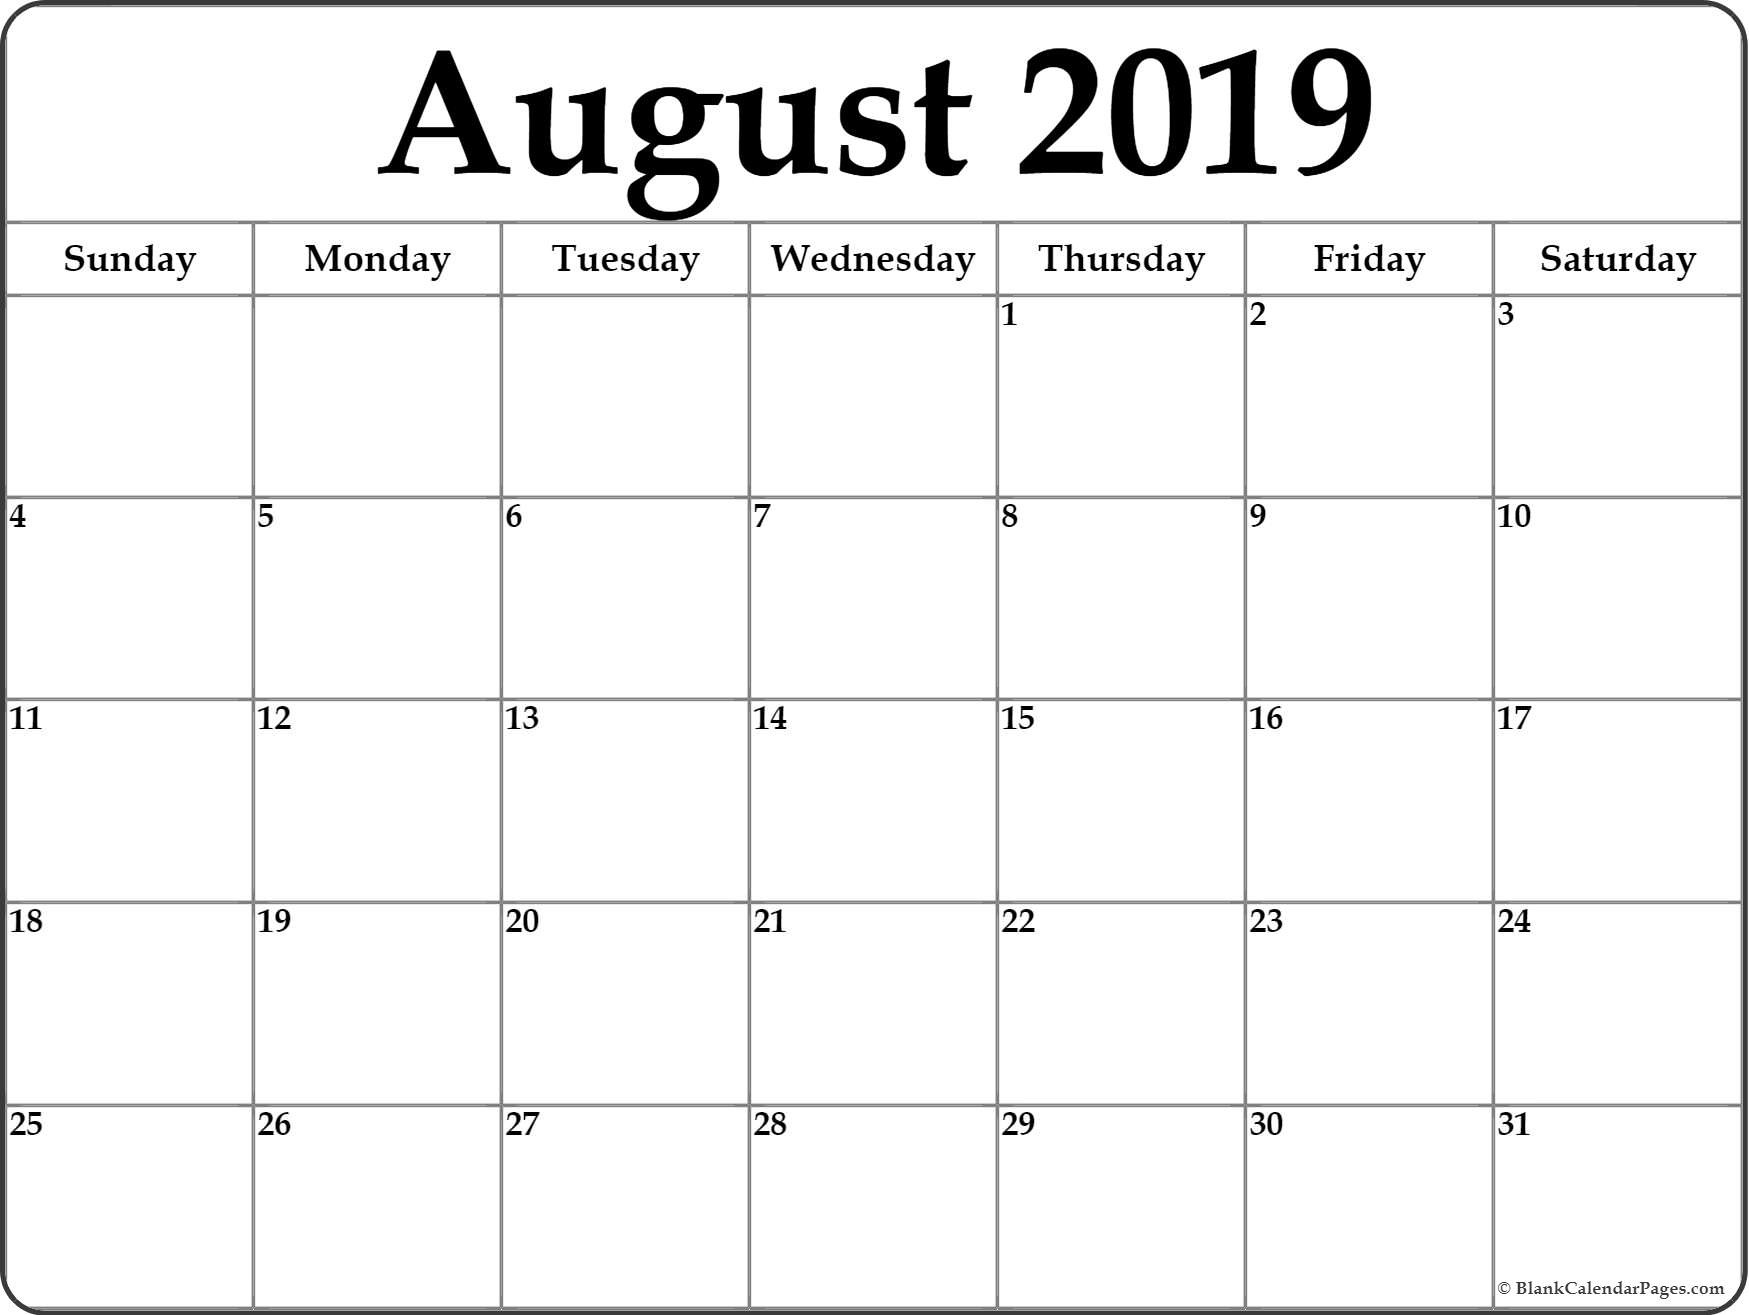 August 2019 Calendar | Free Printable Monthly Calendars-At A Glance Lined Monthly Calendar Printable